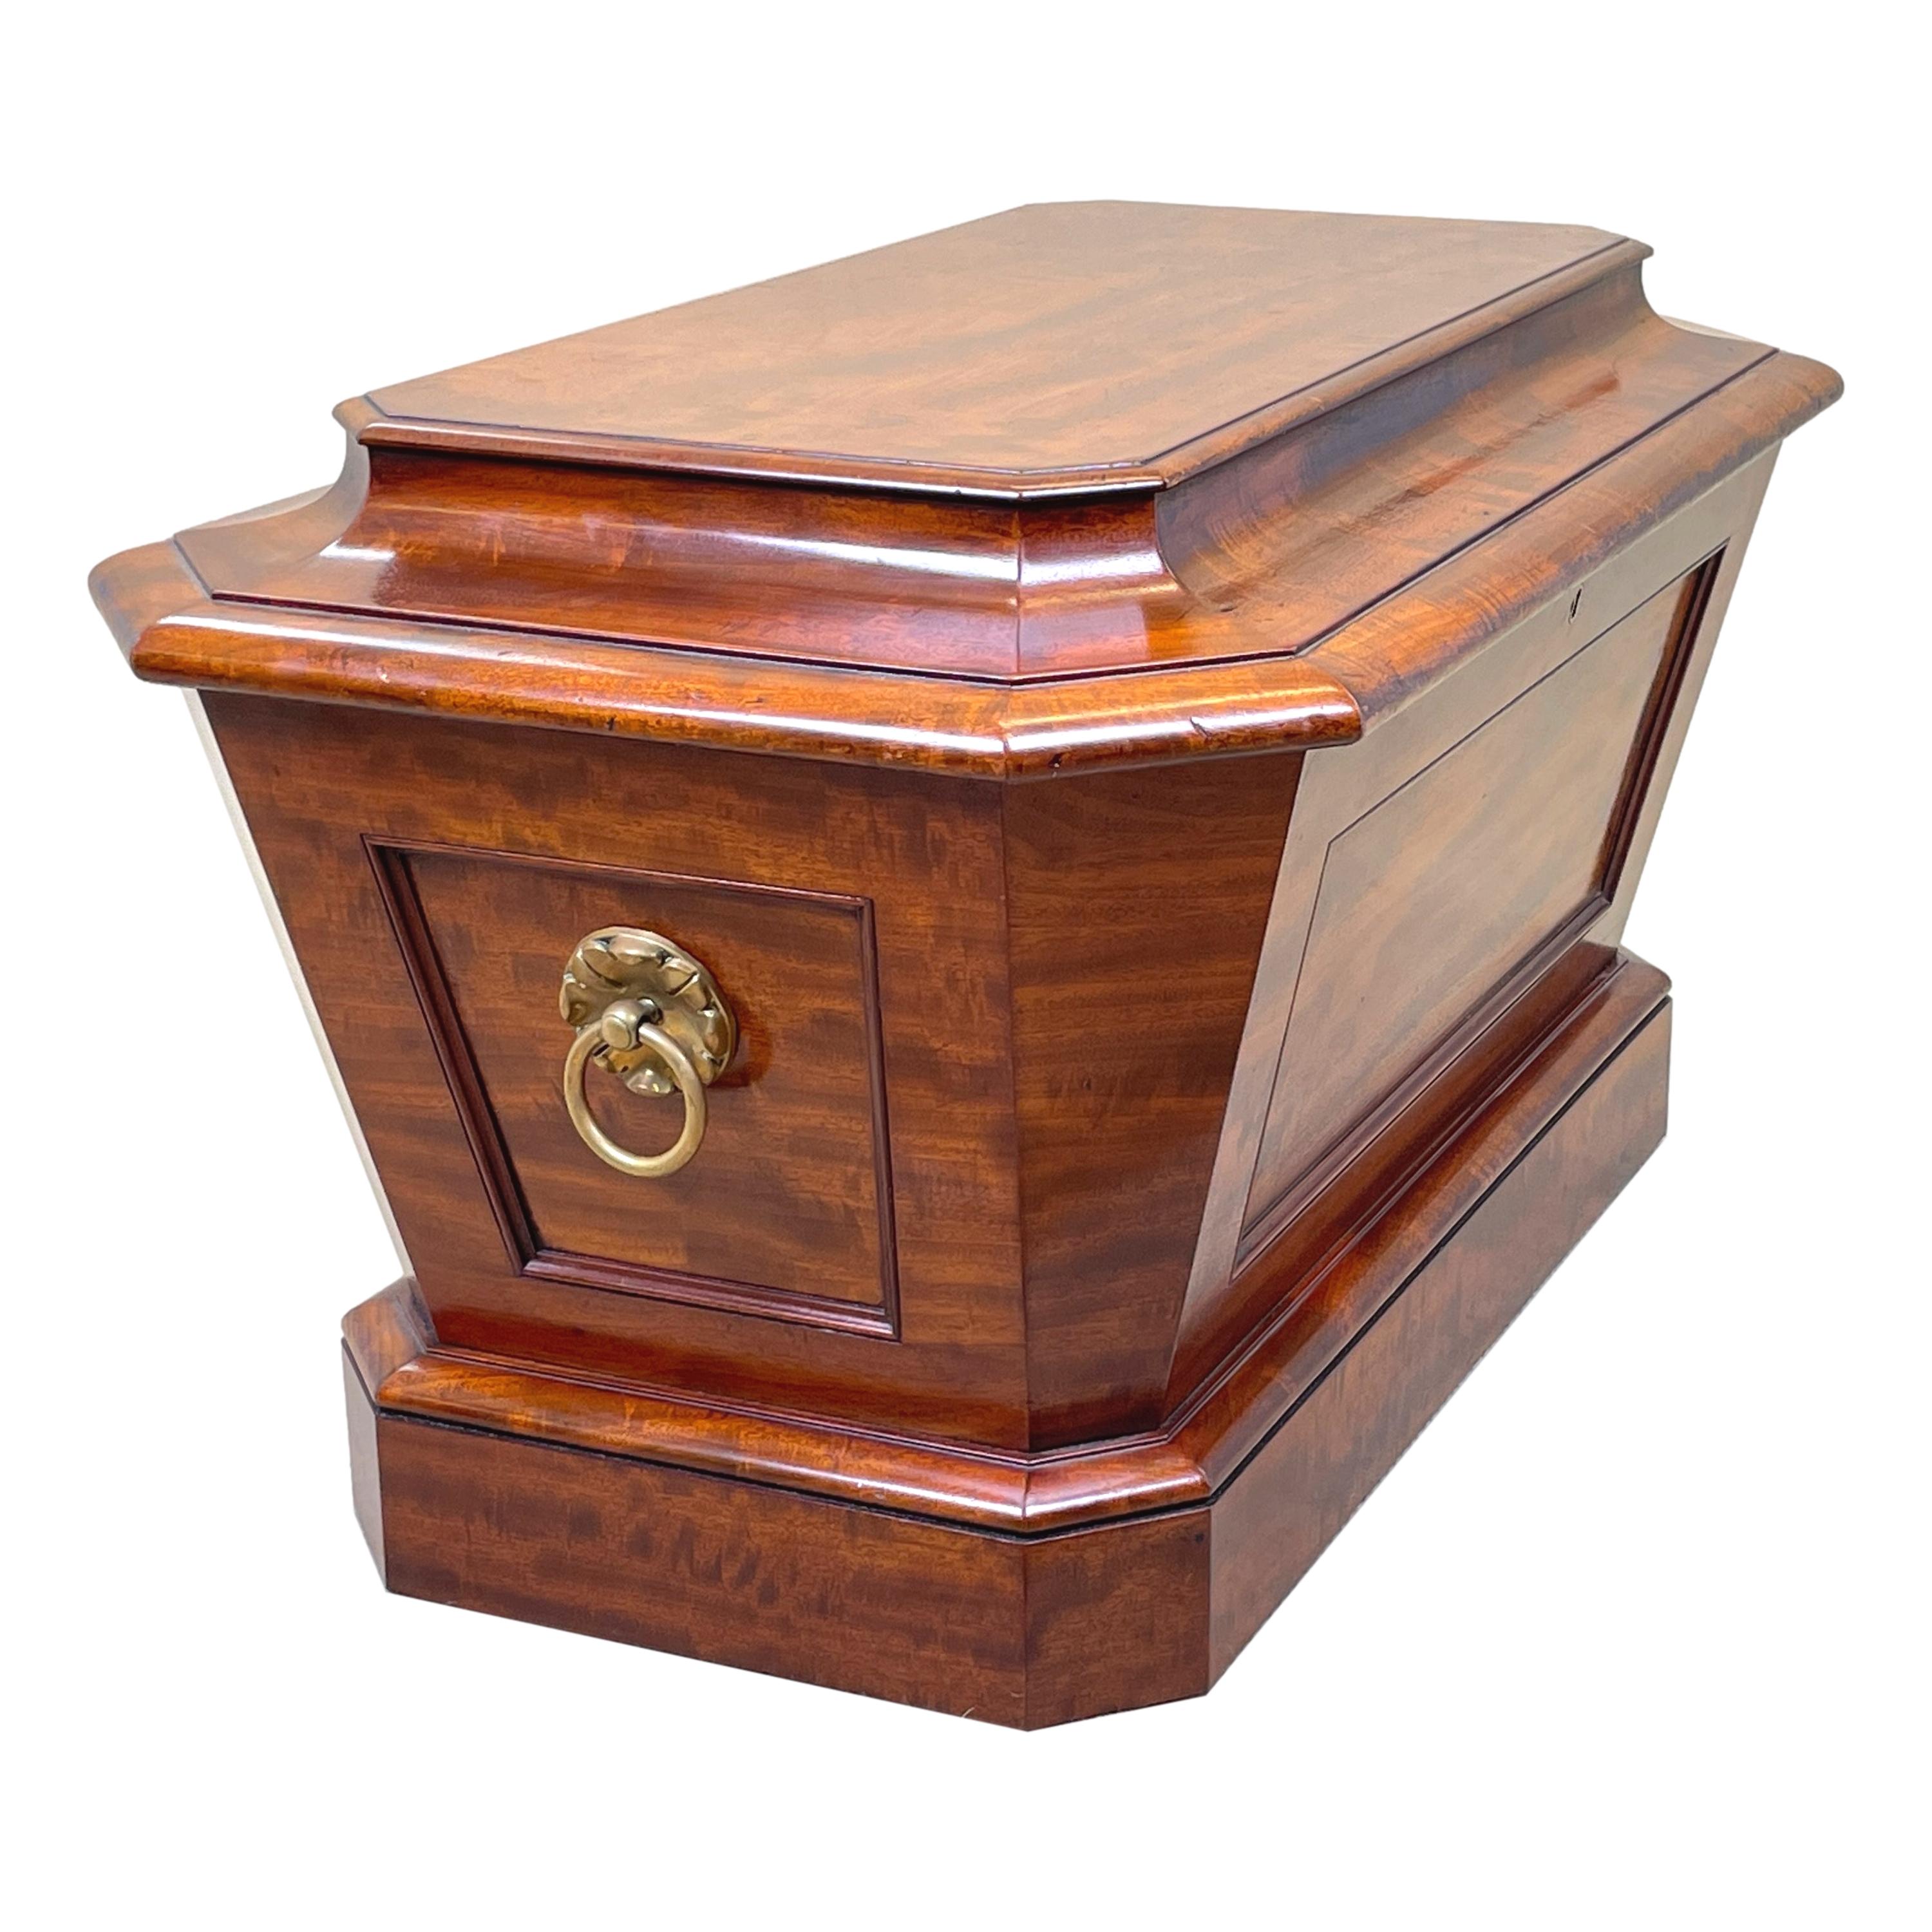 English Regency Mahogany Sarcophagus Shaped Wine Cooler For Sale 3